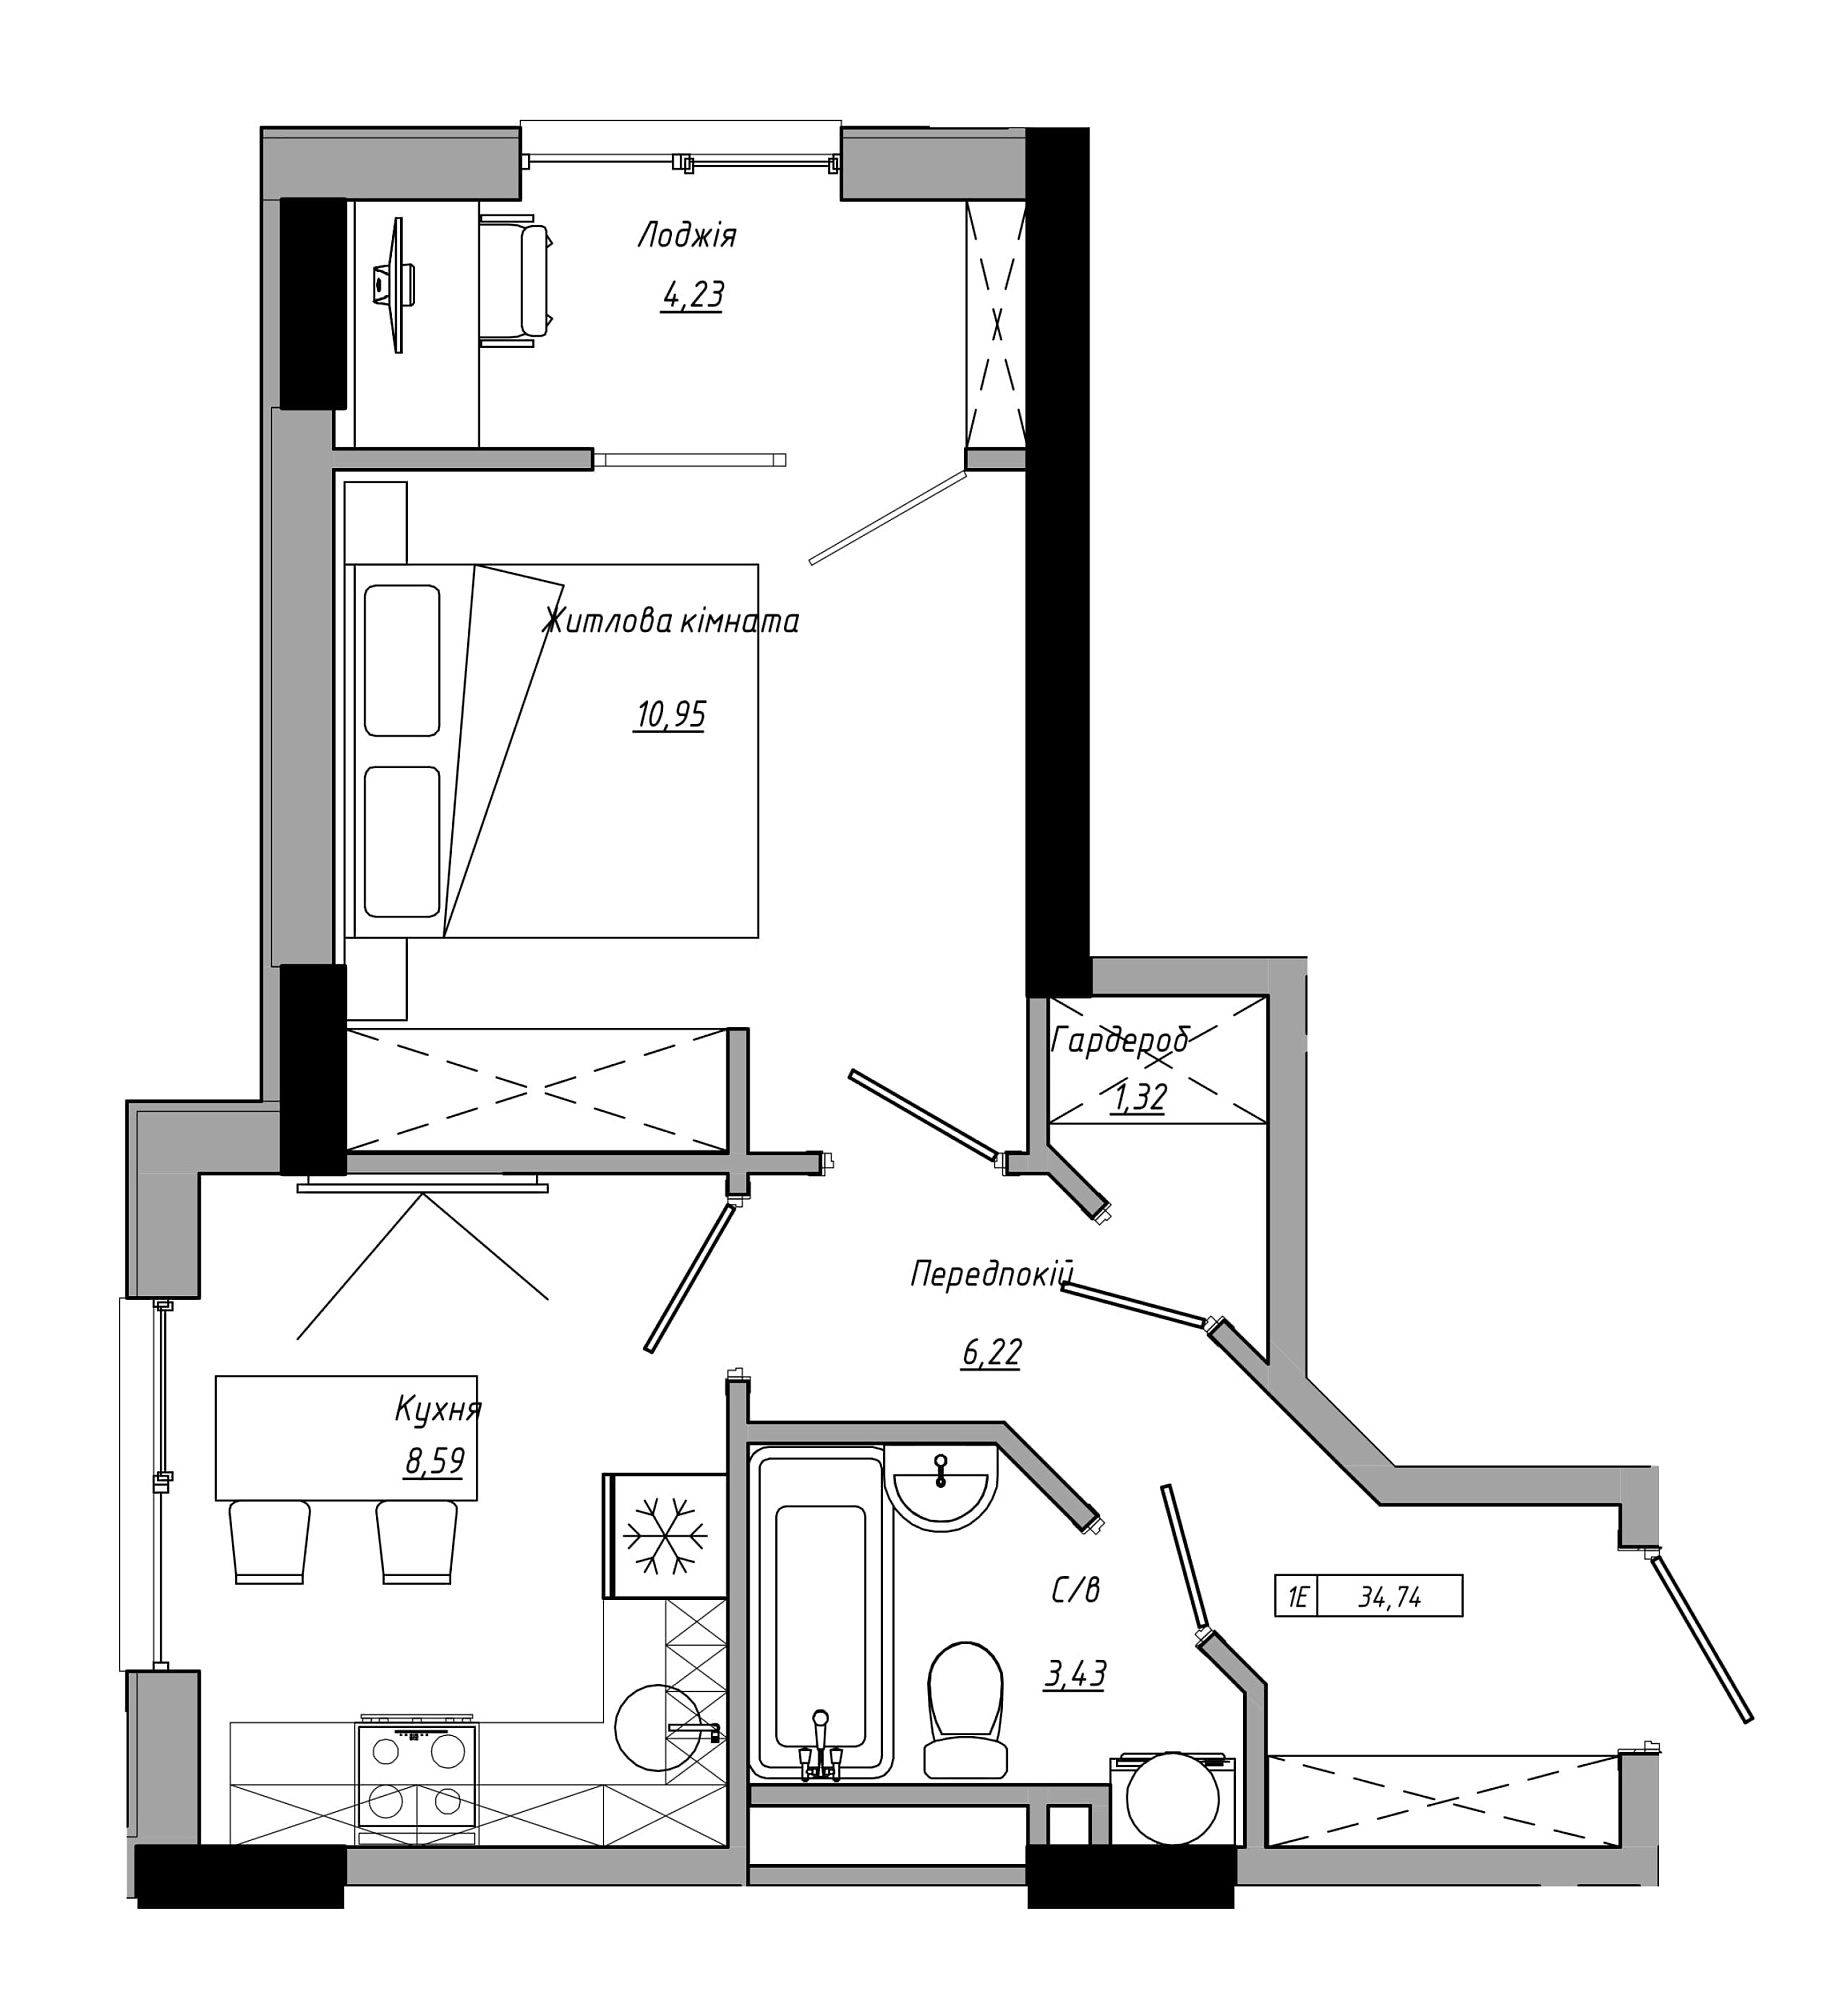 Planning 1-rm flats area 34.74m2, AB-21-13/00109.